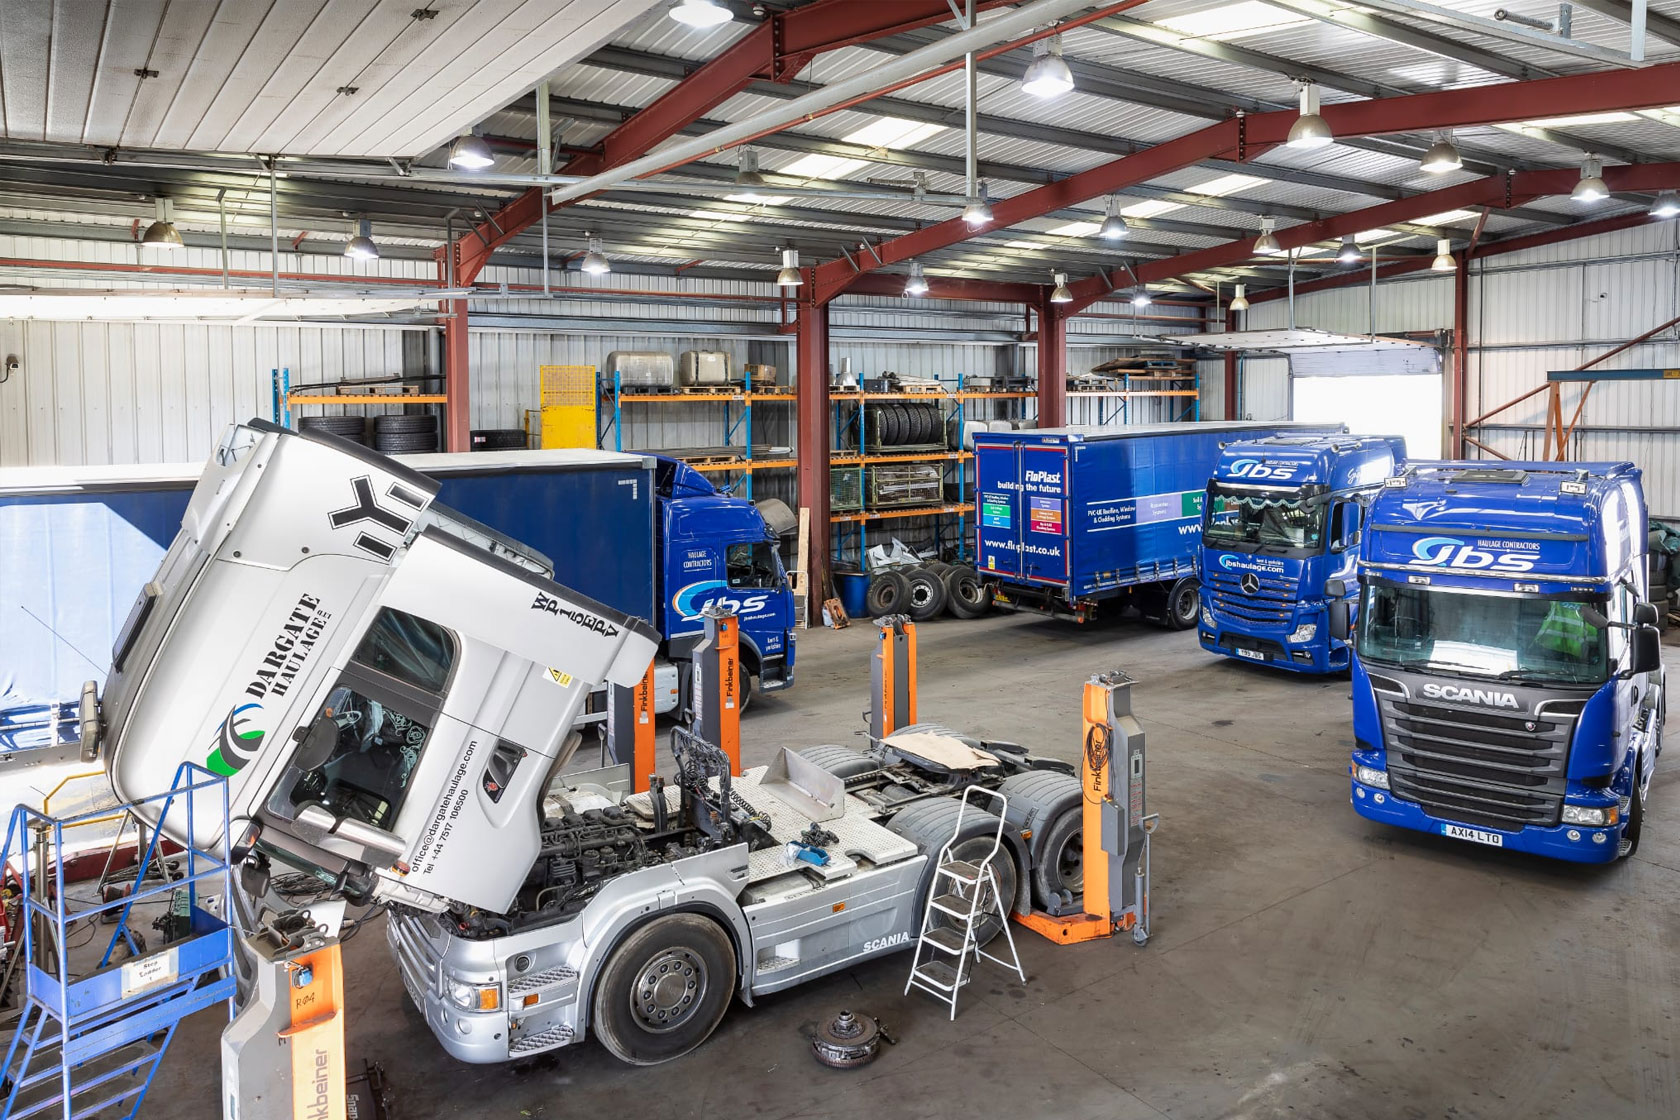 A image inside our expanded workshop, to the left of the image is a white truck being worked one while 2 other trucks are parked up behind it 